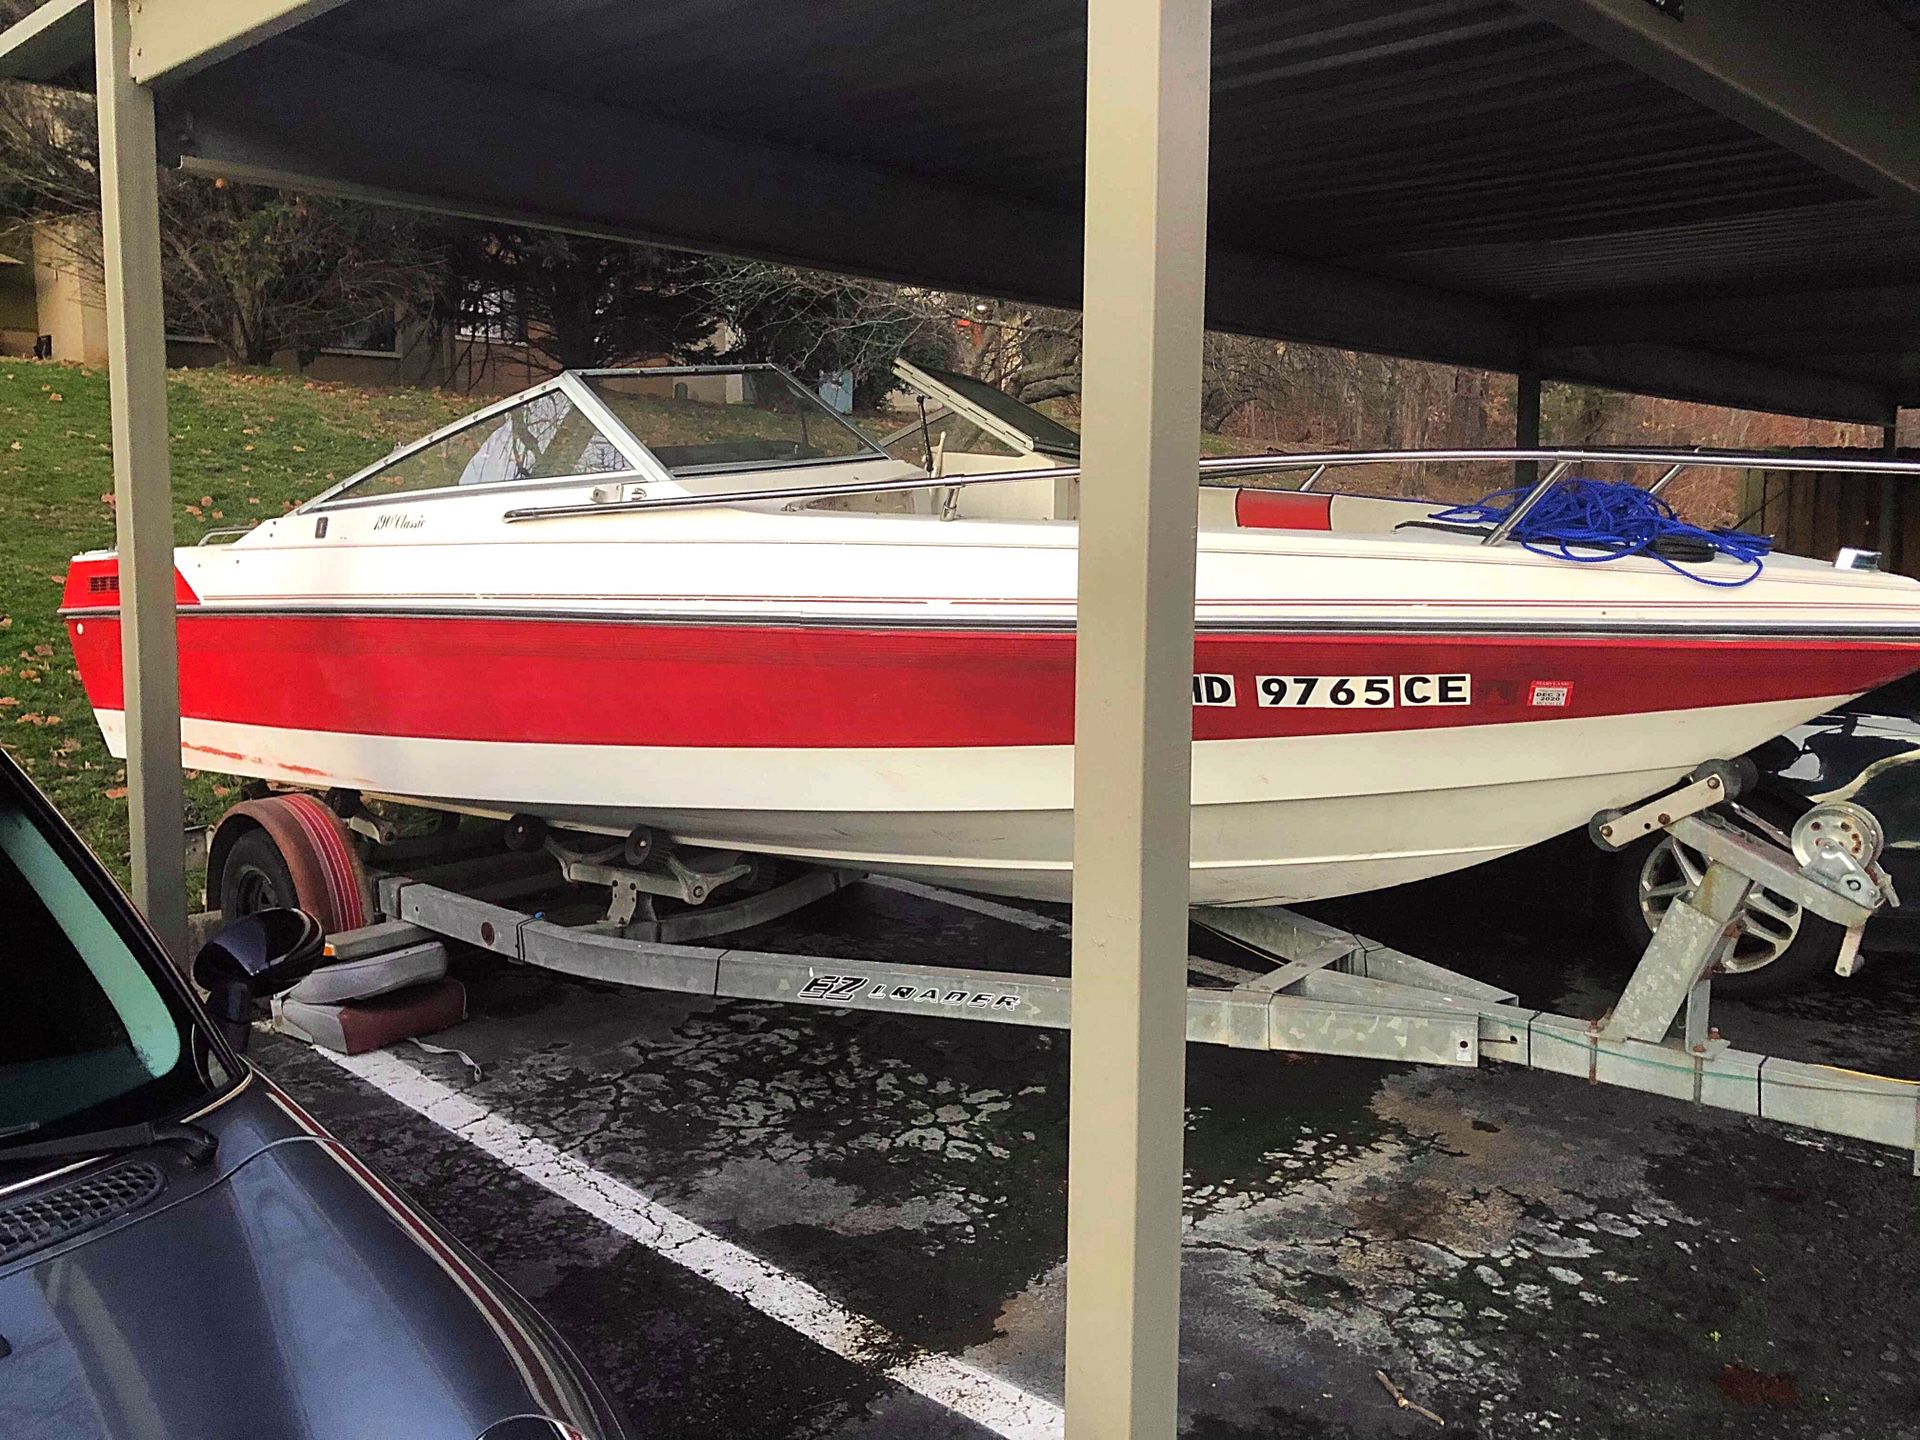 1988 Wellcraft 190 boat with trailer